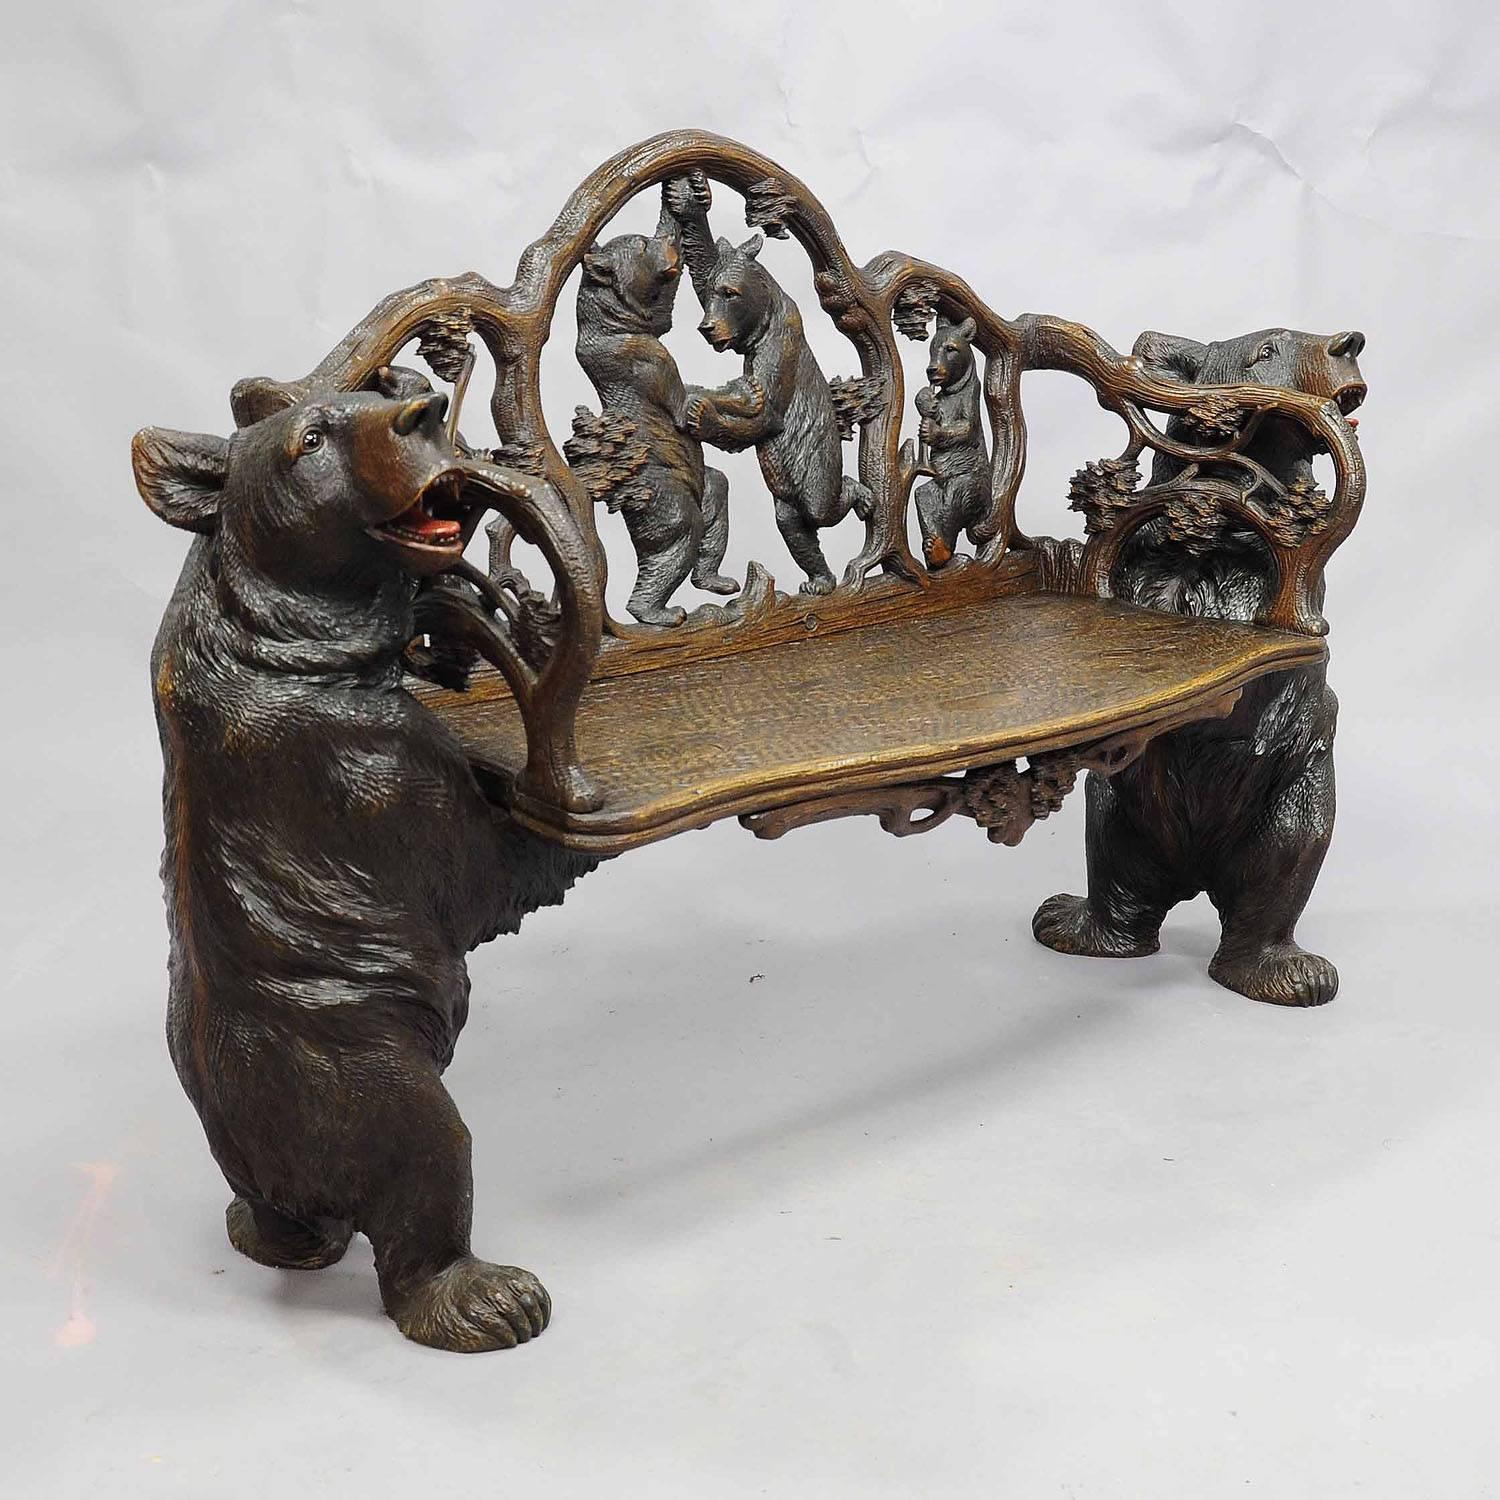 A rare large hand carved linden wood bear bench. With bear musicians and dancing bears on the backrest. Two large bears holding the seat. Executed circa 1900, Swiss Brienz.